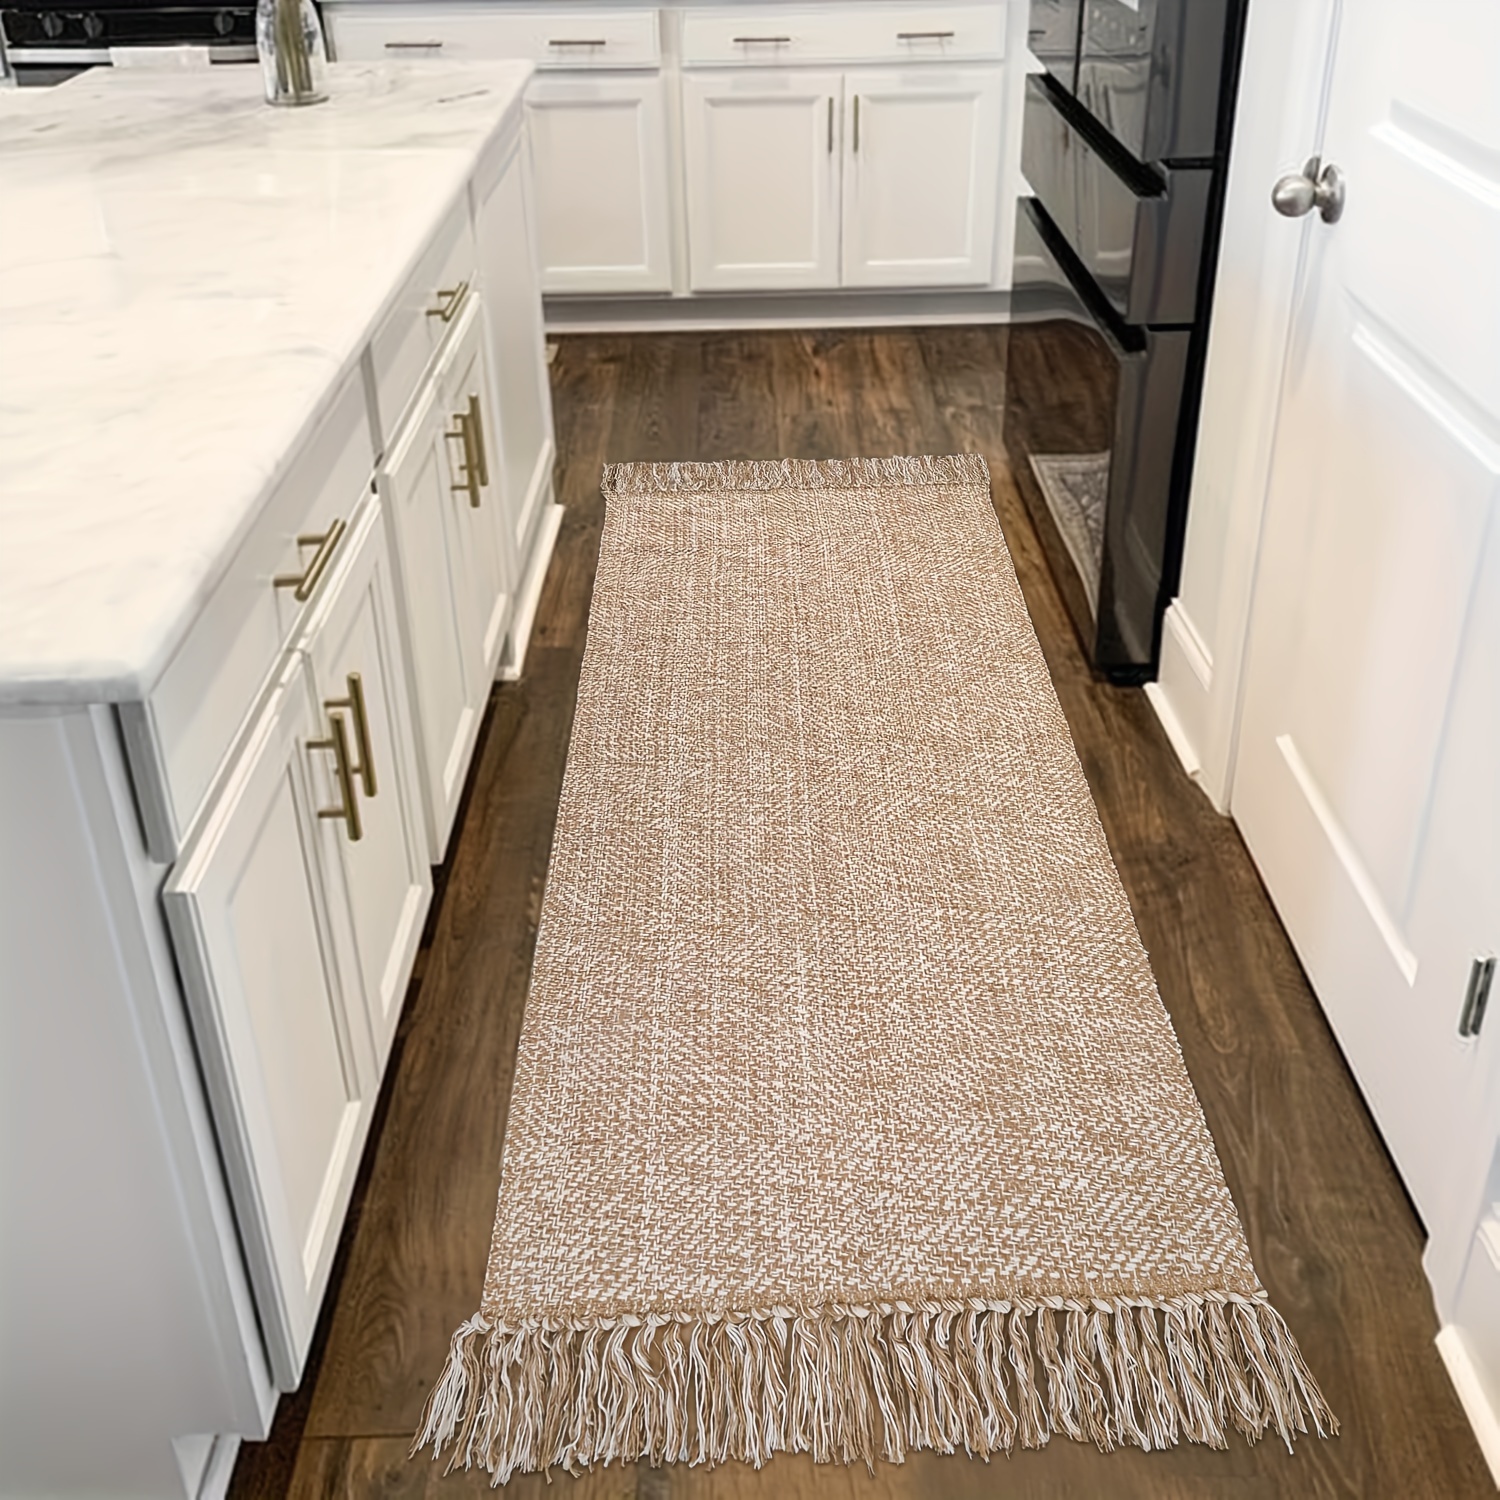 

2x3/3x5/2x6 Washable Area Rug, Modern Woven Kitchen Rugs, Tan/cream Braided Cotton Rug Indoor Door Mat Throw Carpet For Entryway Living Room Nursery Mudroom Laundry